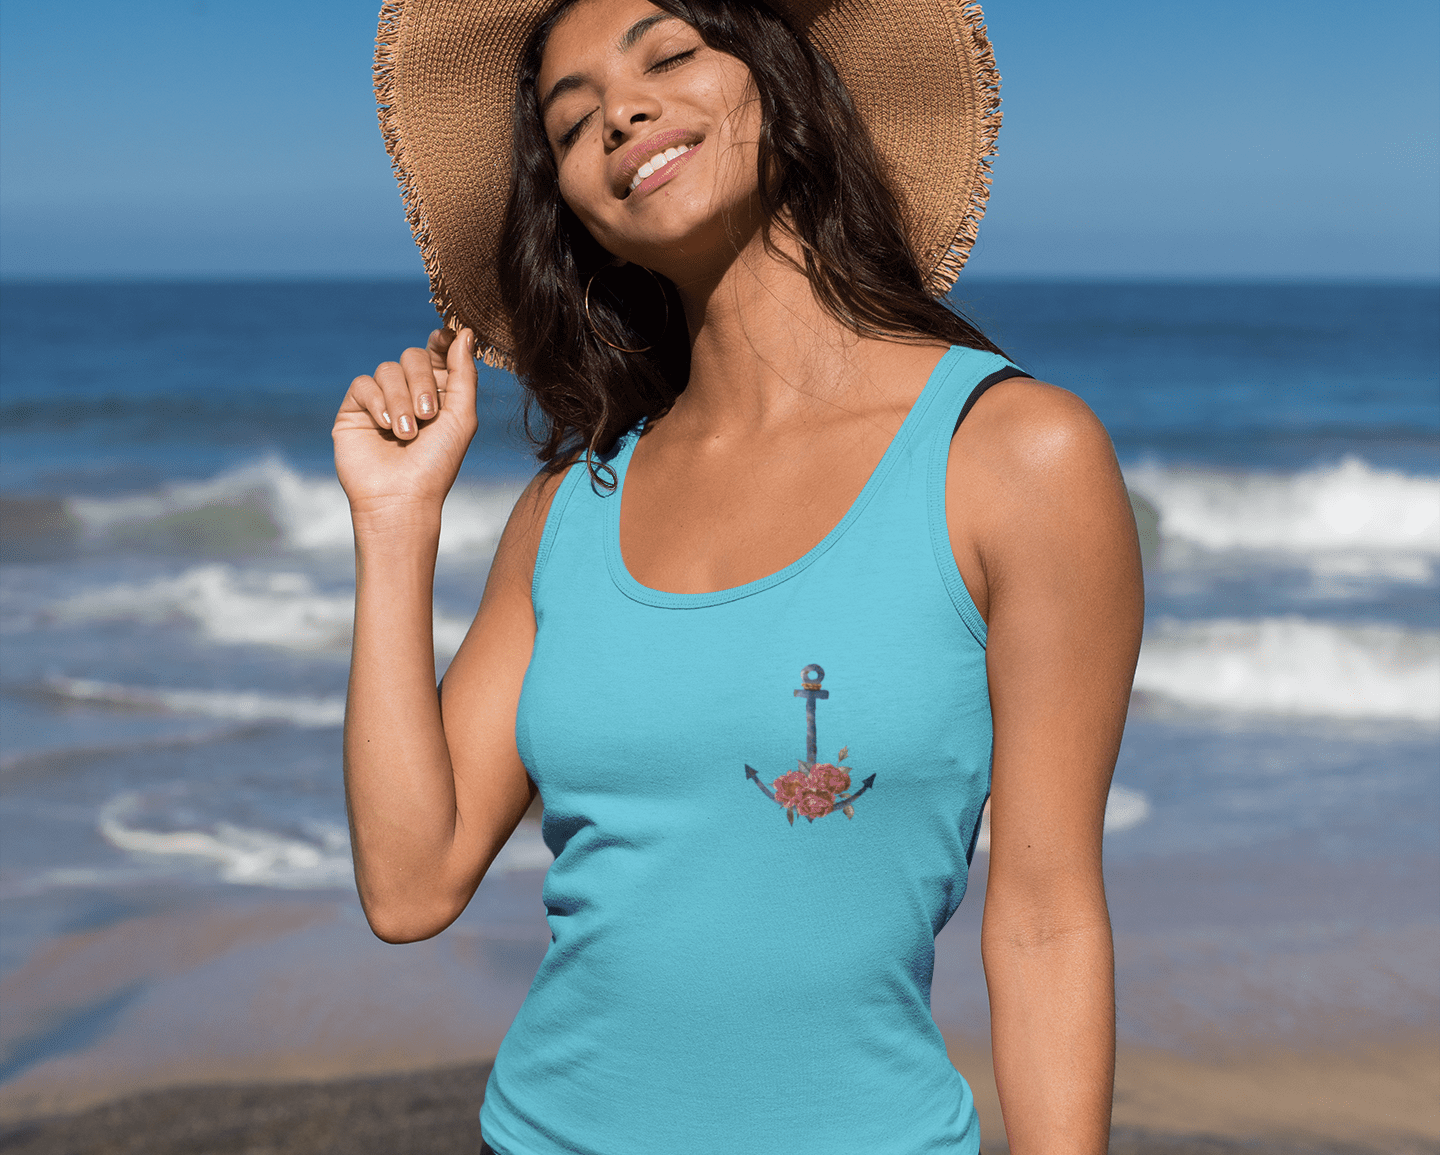 tank-top-mockup-of-a-young-woman-with-a-floppy-hat-at-the-beach-26771